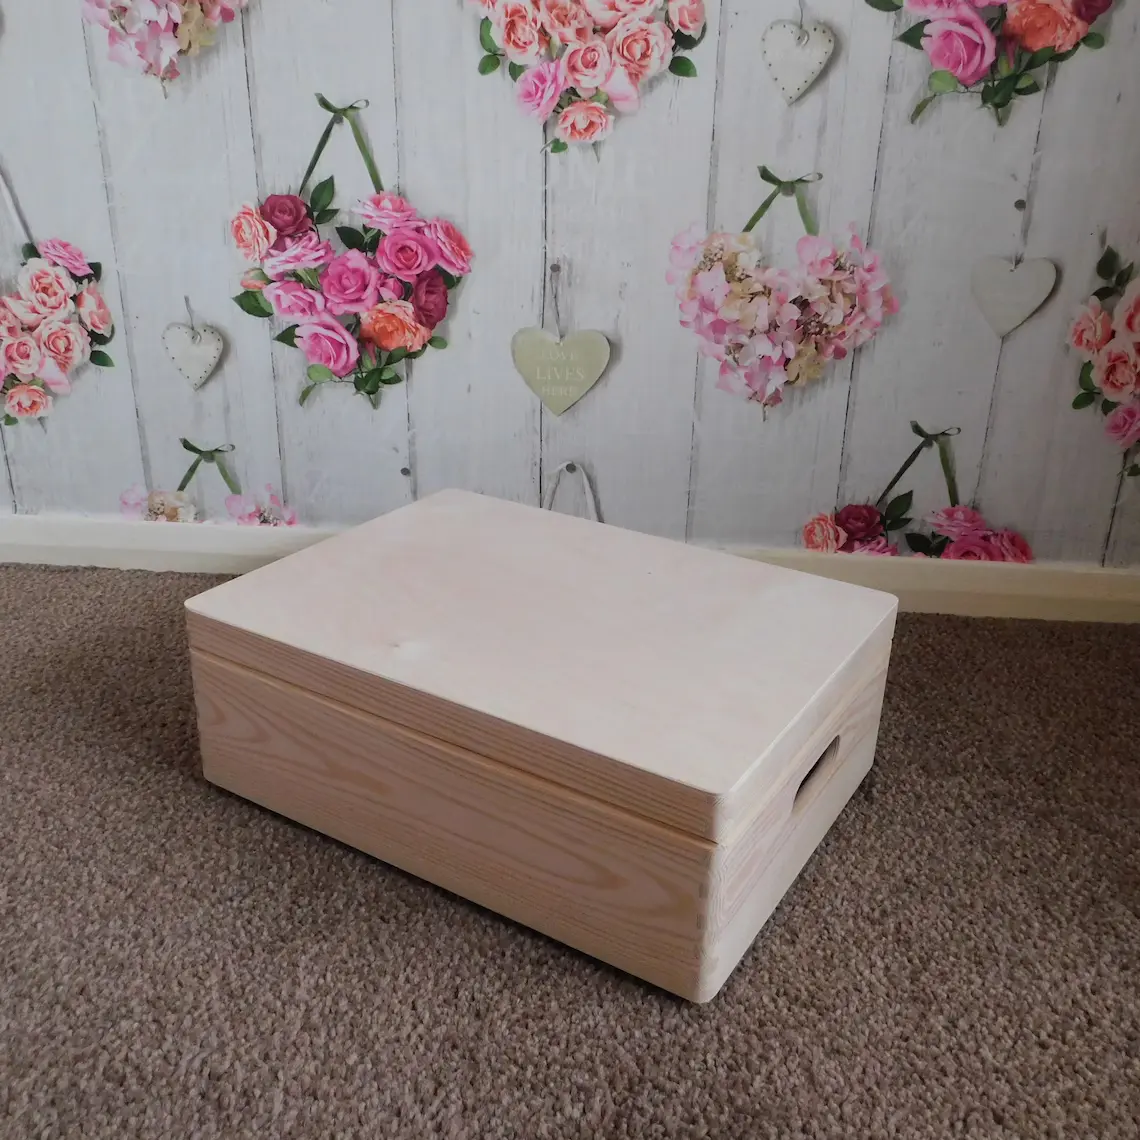 Natural Unpainted Wooden Box With Lid - L40cm x W30cm x H14cm - With Handles